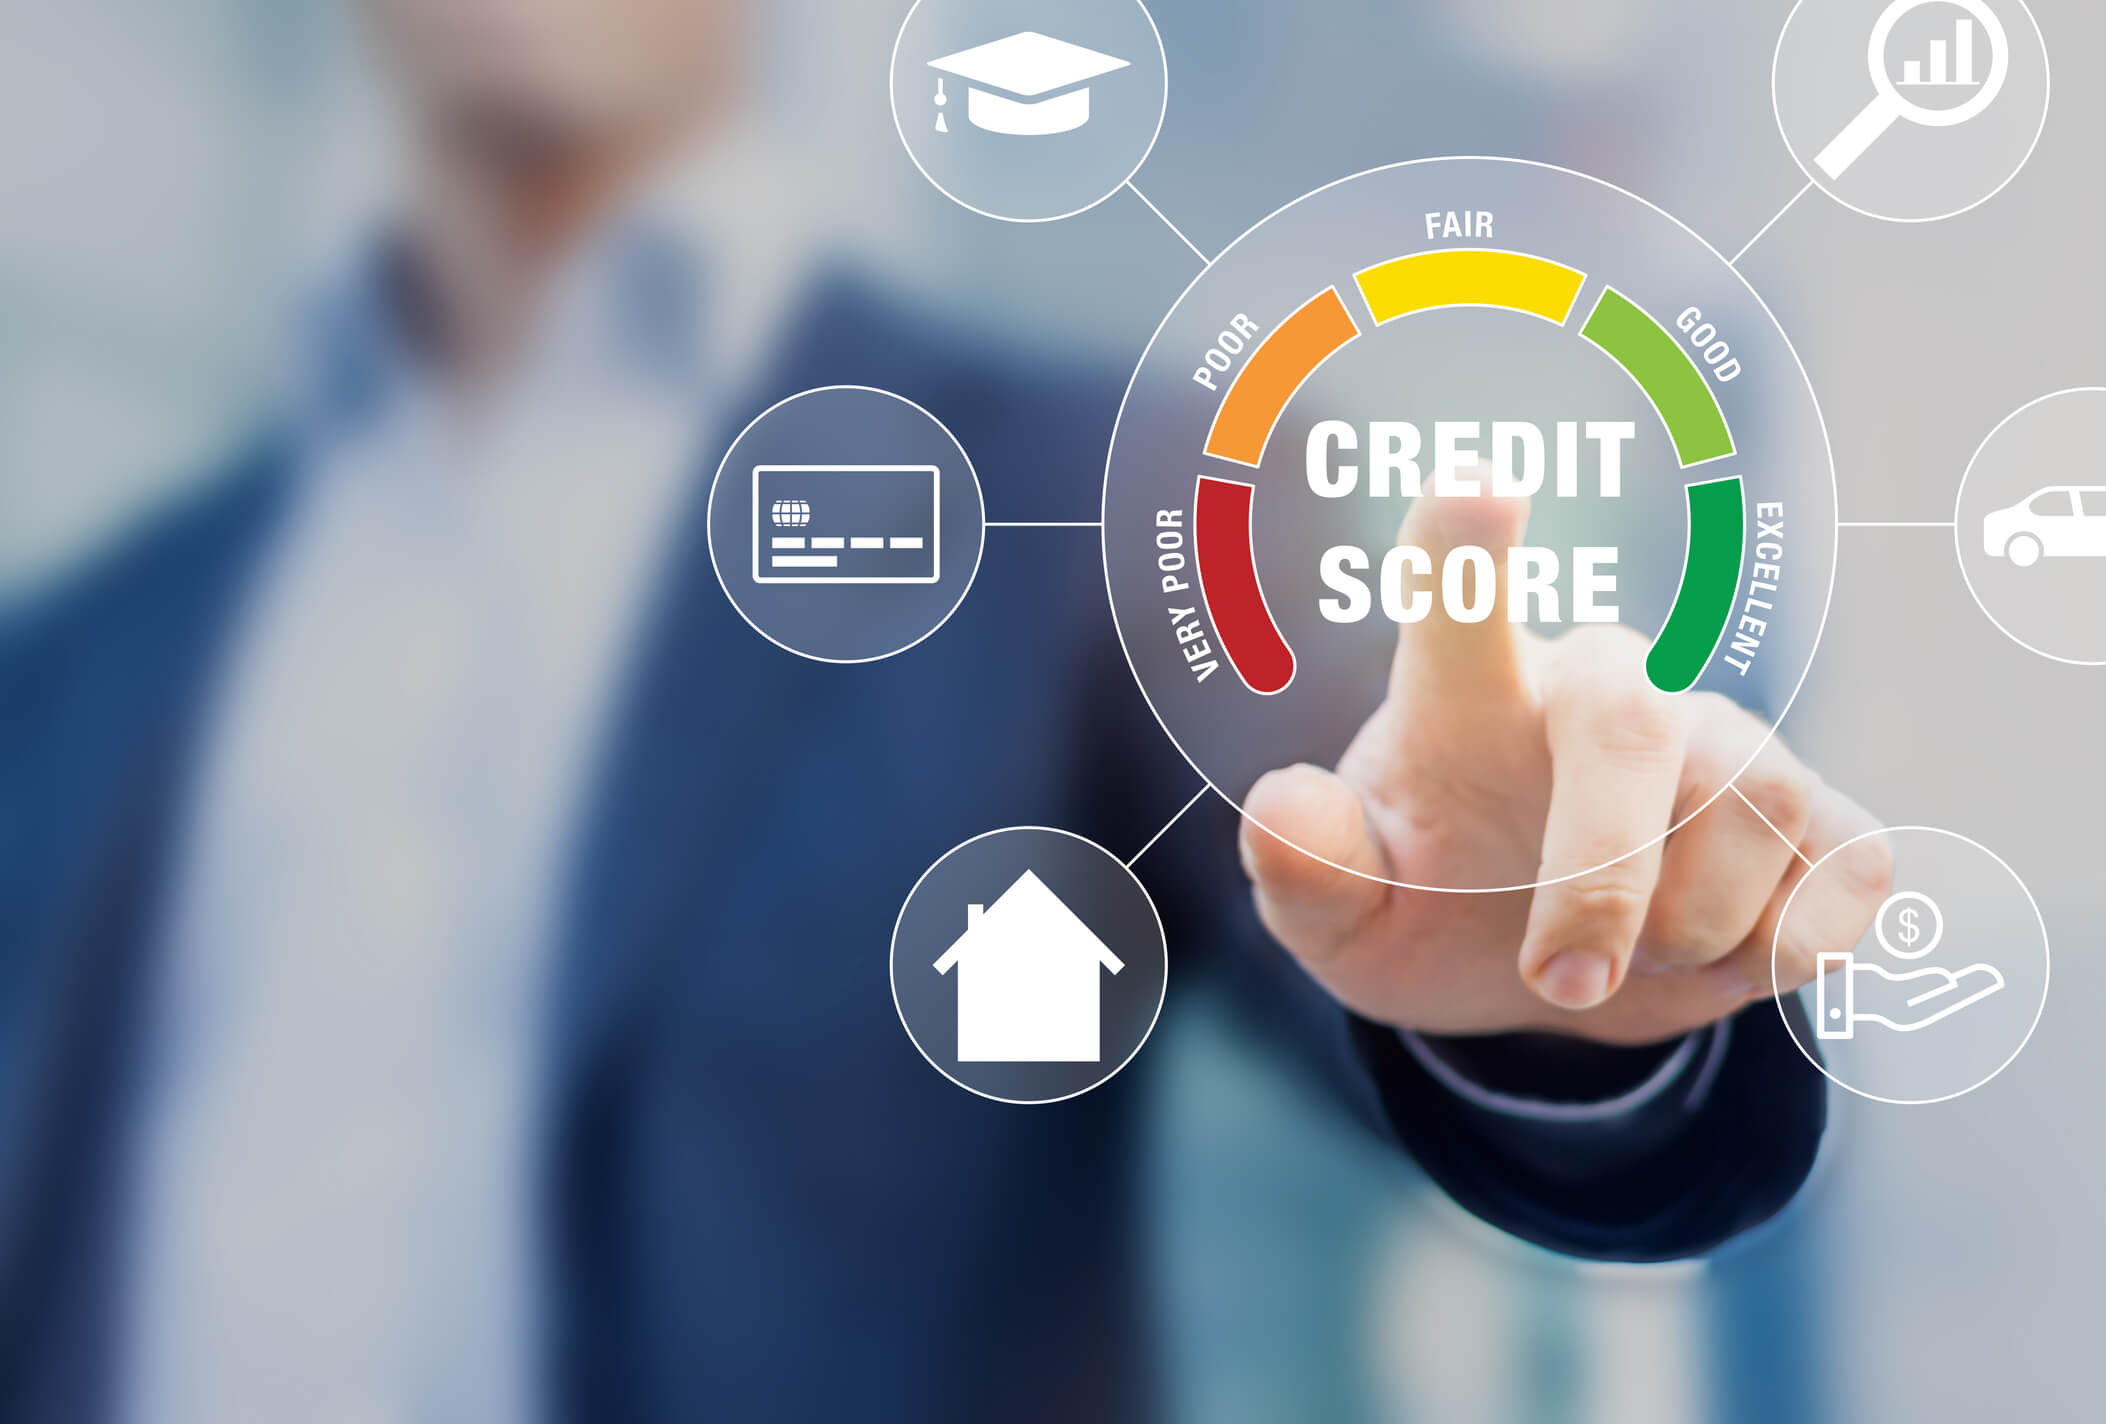 Business Credit Fast - Complete Controller